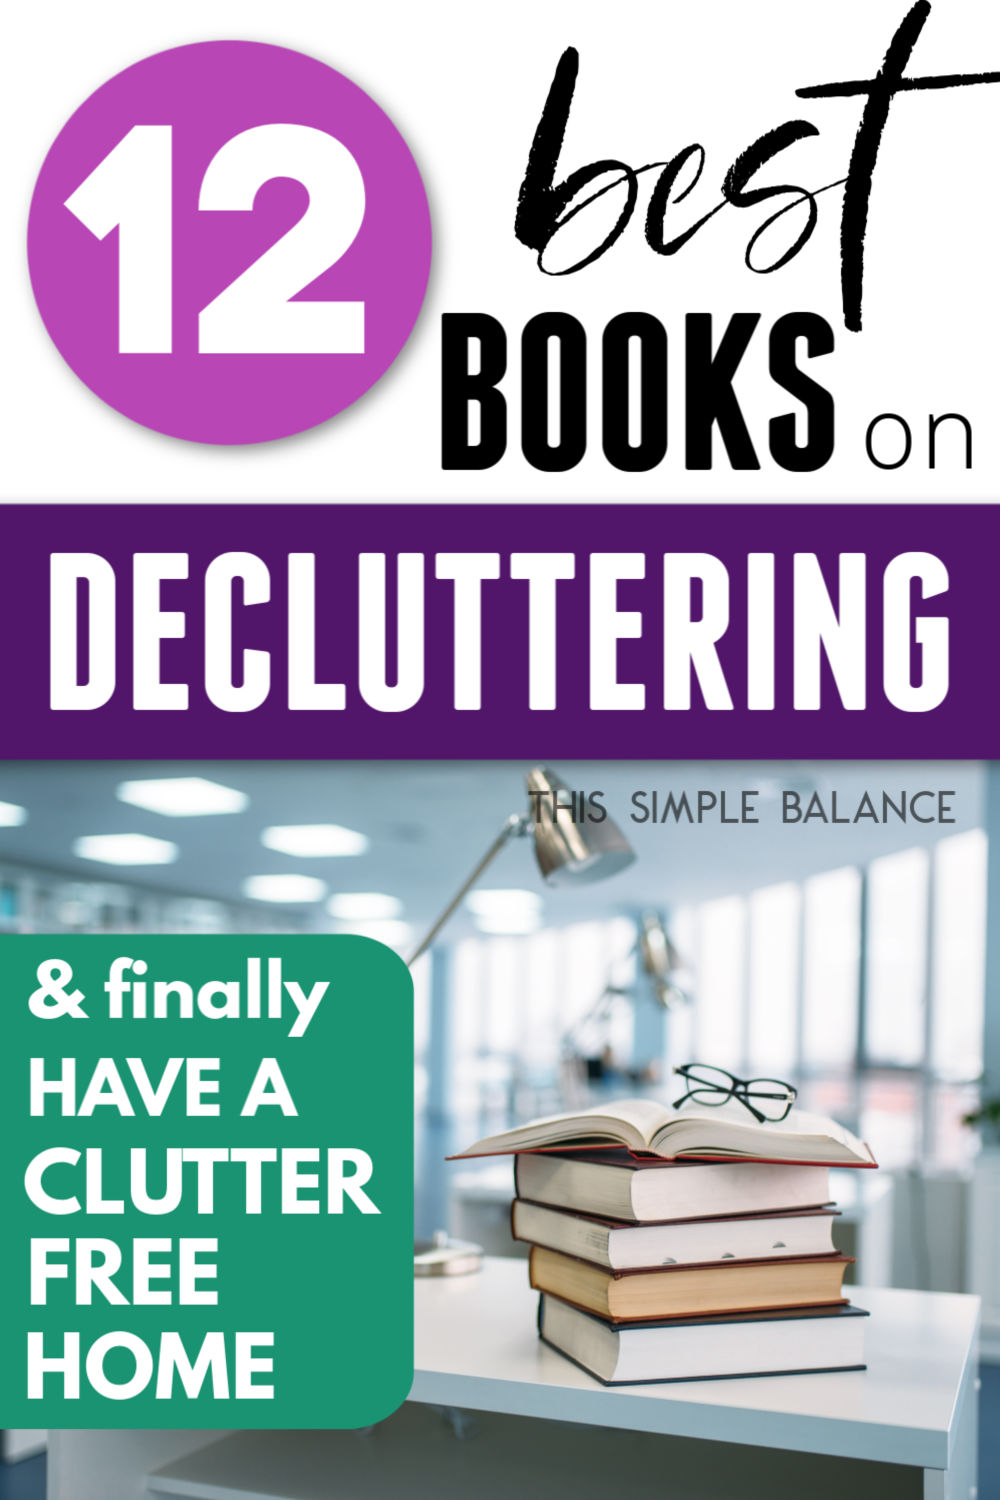 books on decluttering stacked on desk with glasses on top, with text overlay, "12 best books on decluttering & finally have a clutter free home"